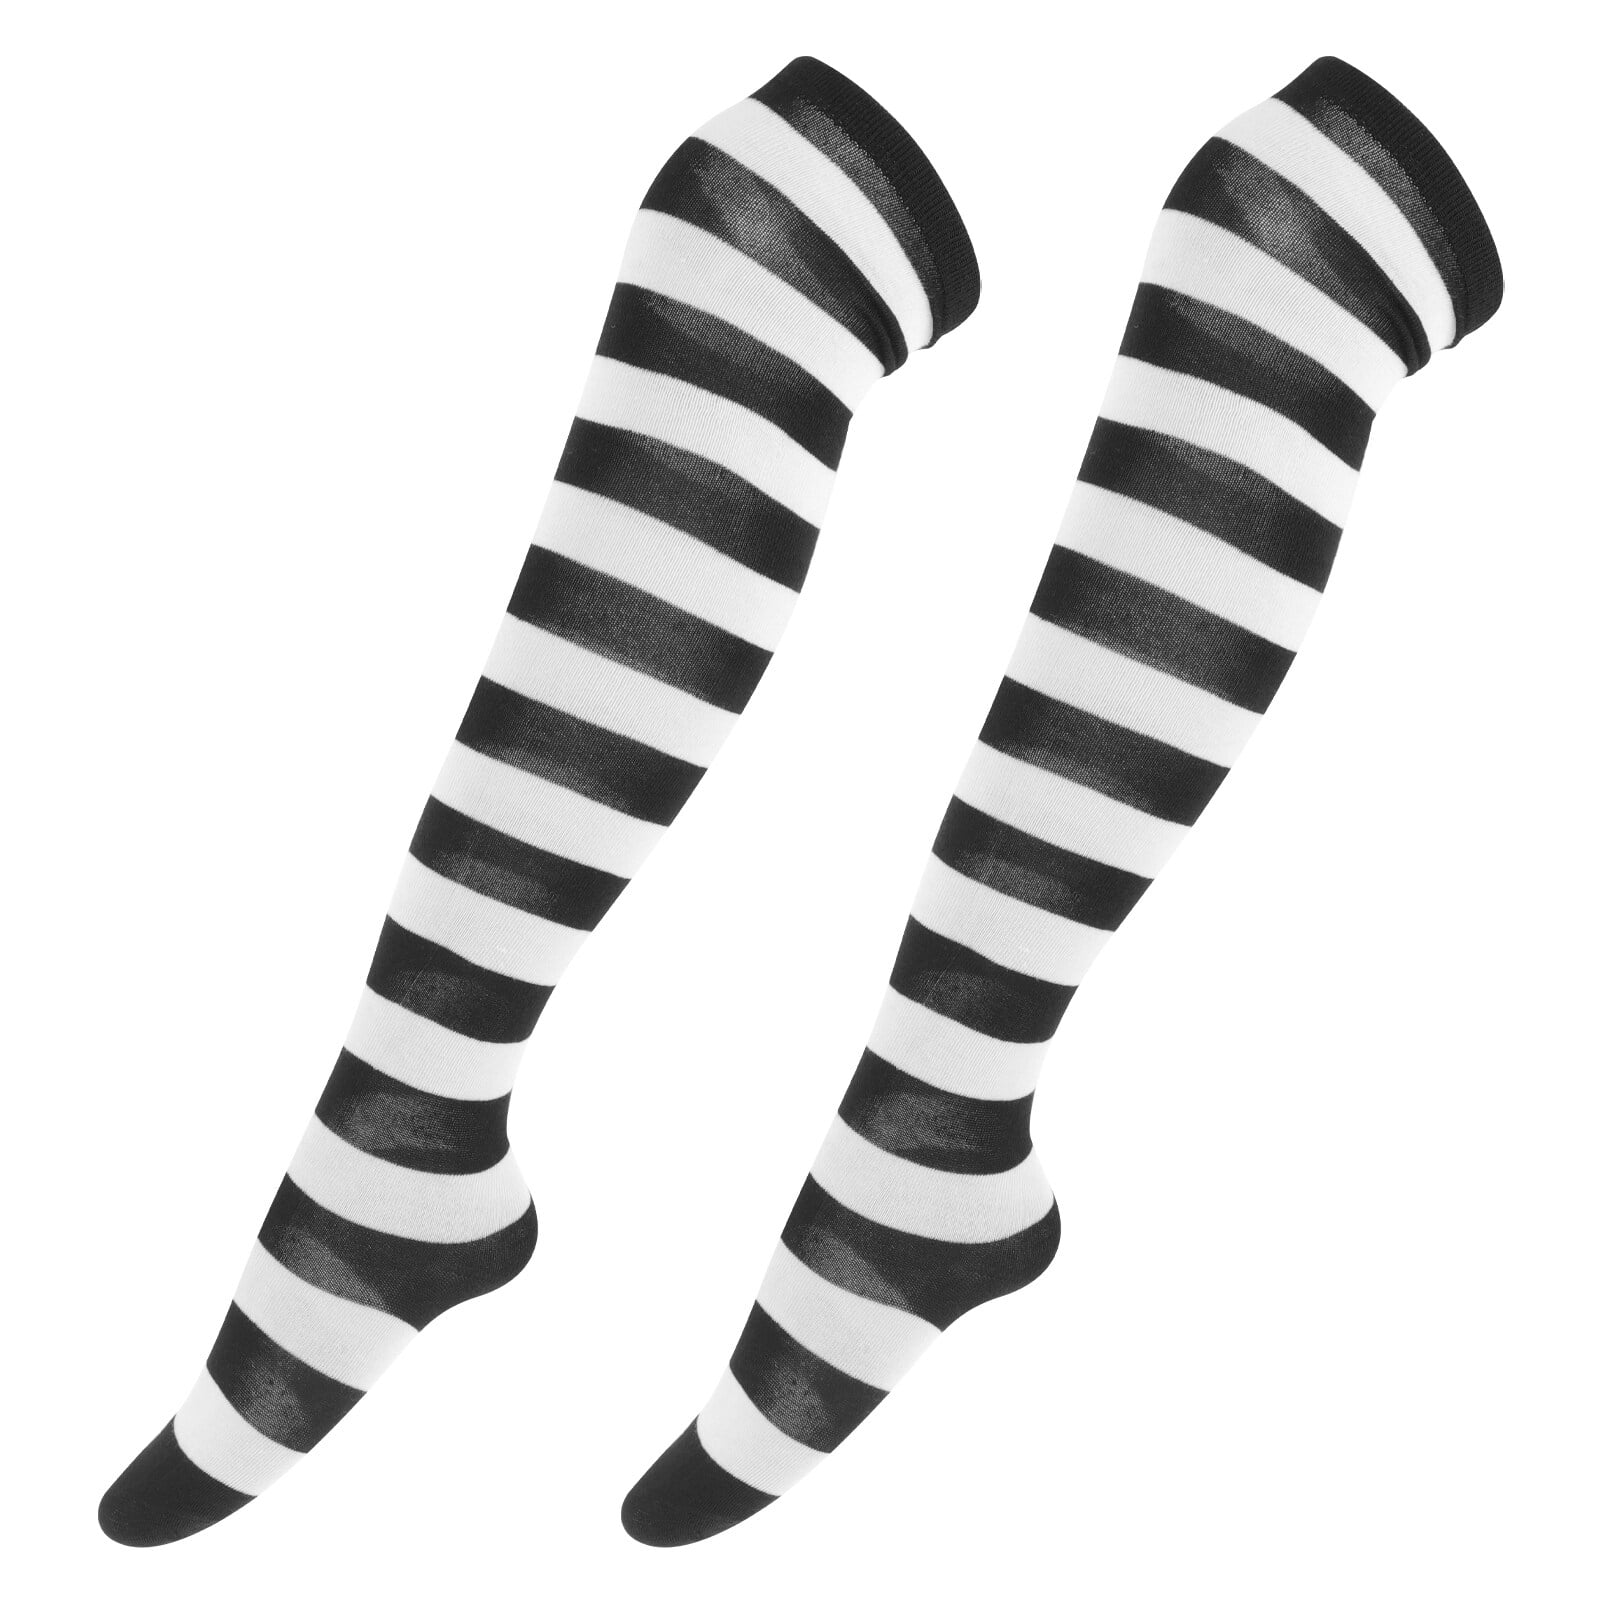 Pair Of Women S Black And White Wide Striped Thigh High Over The Knee Stocking Socks Black